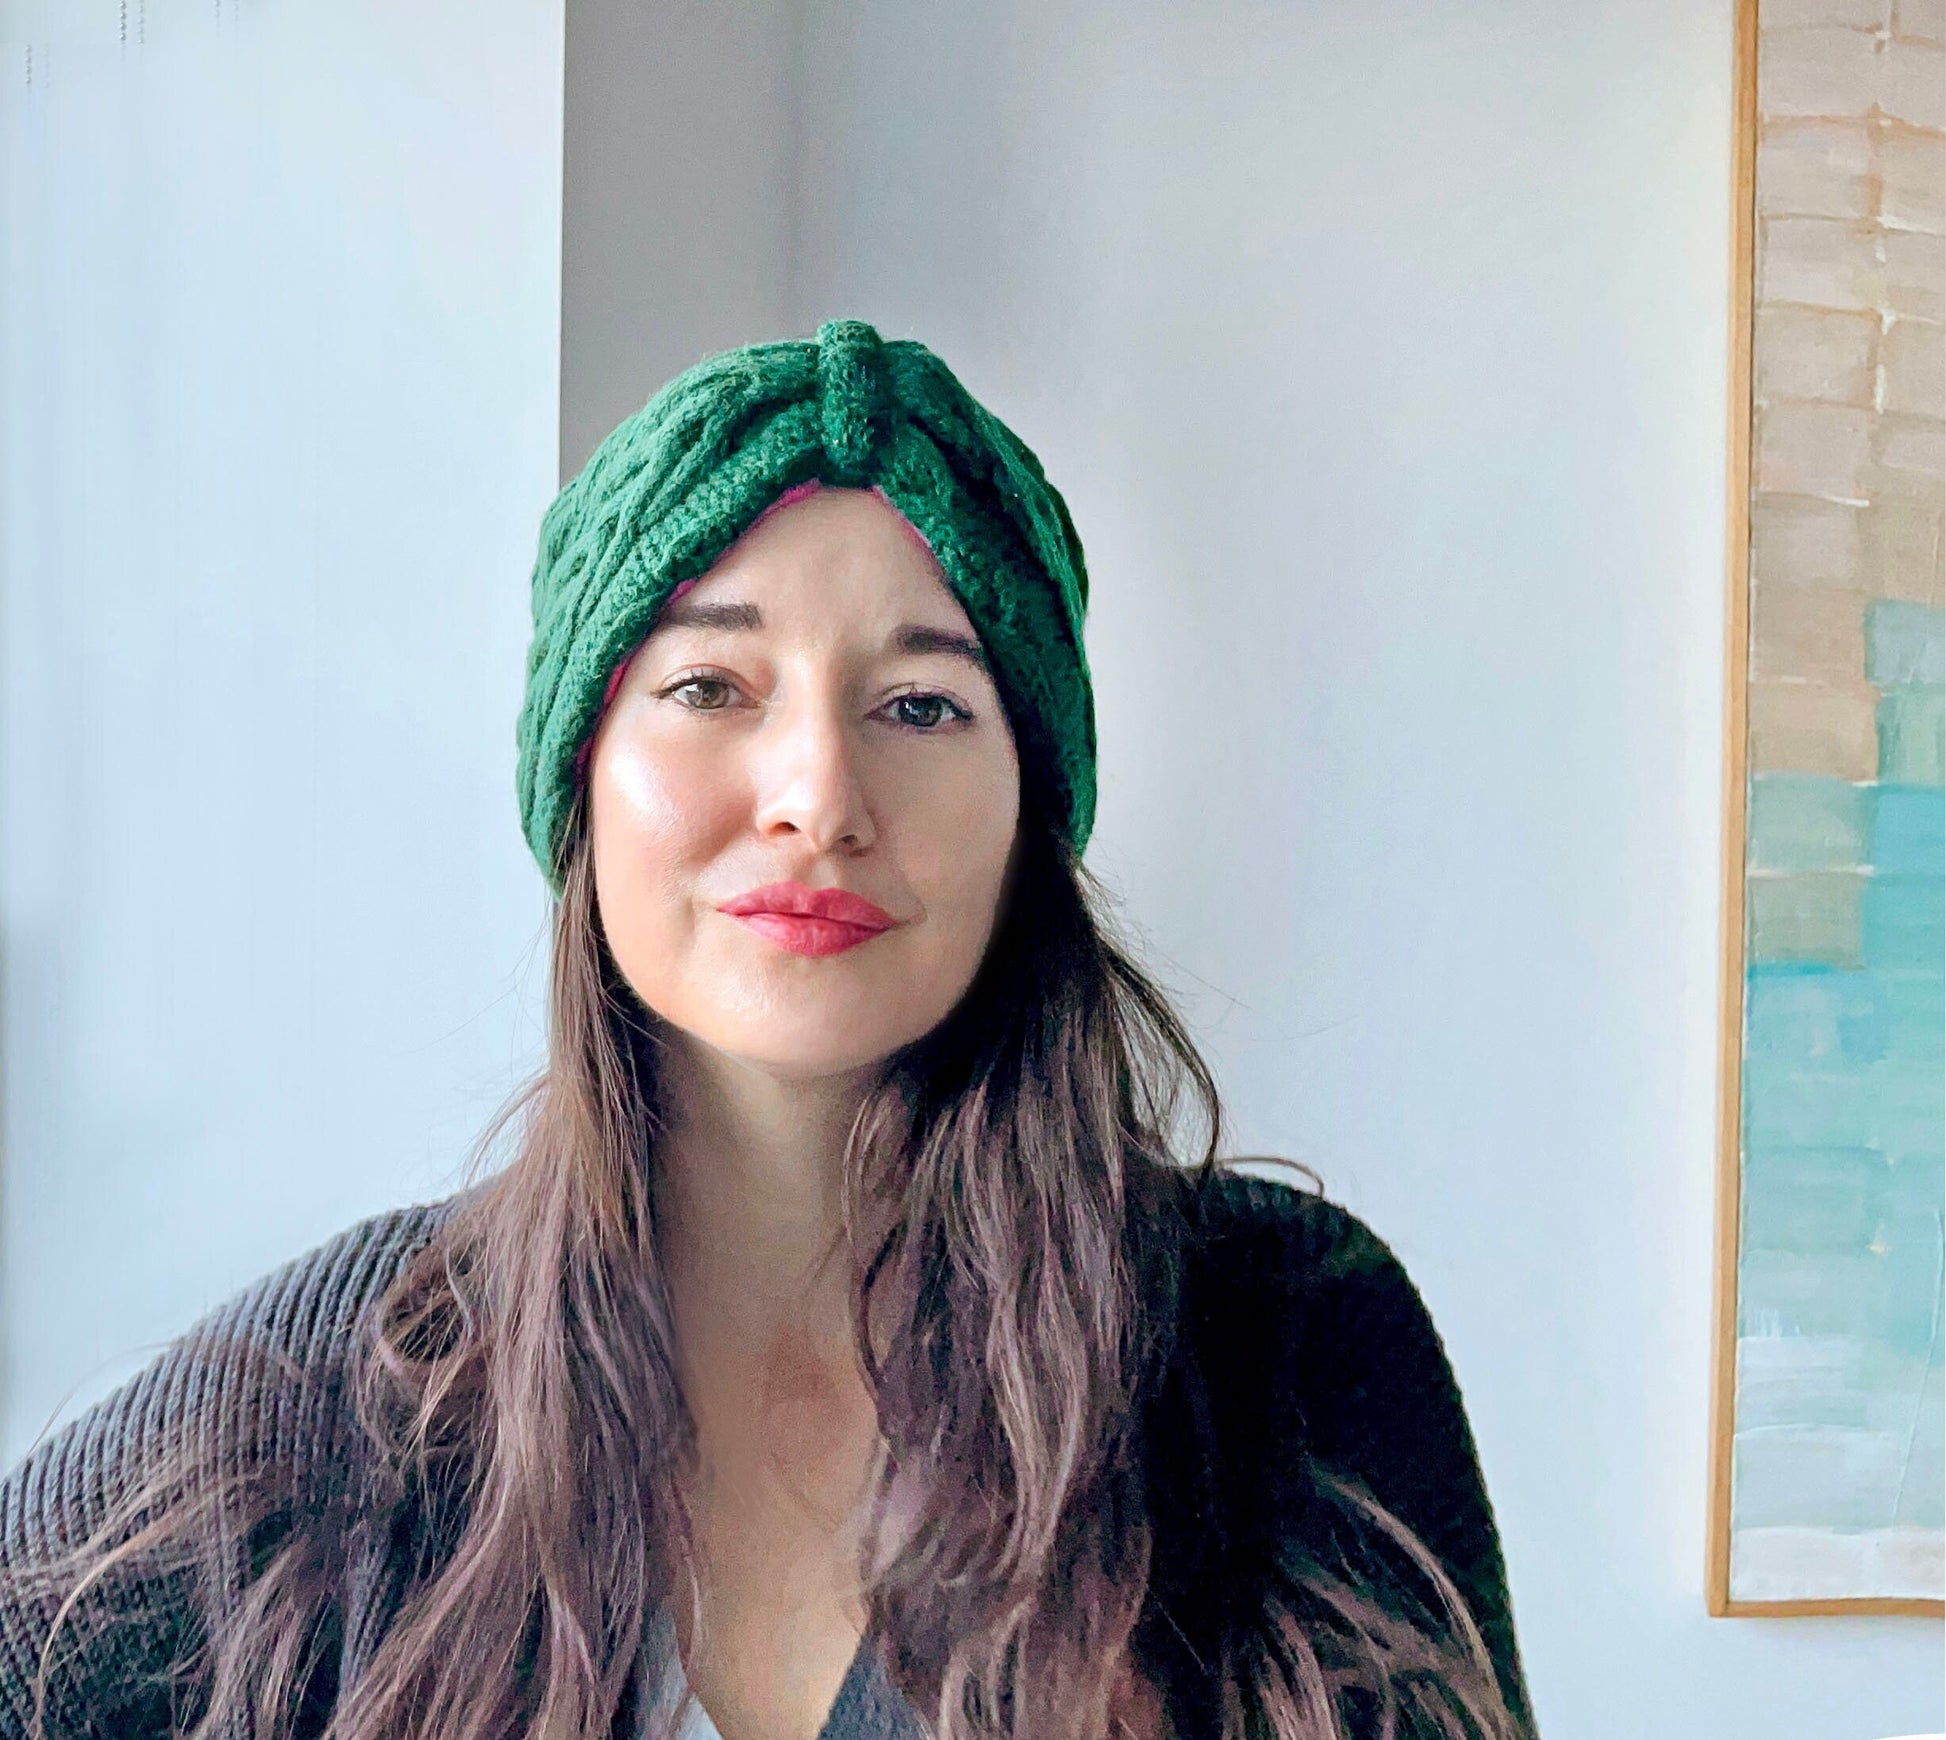 Forest Green Recycled Cashmere & Wool Headband - from Recycled materials